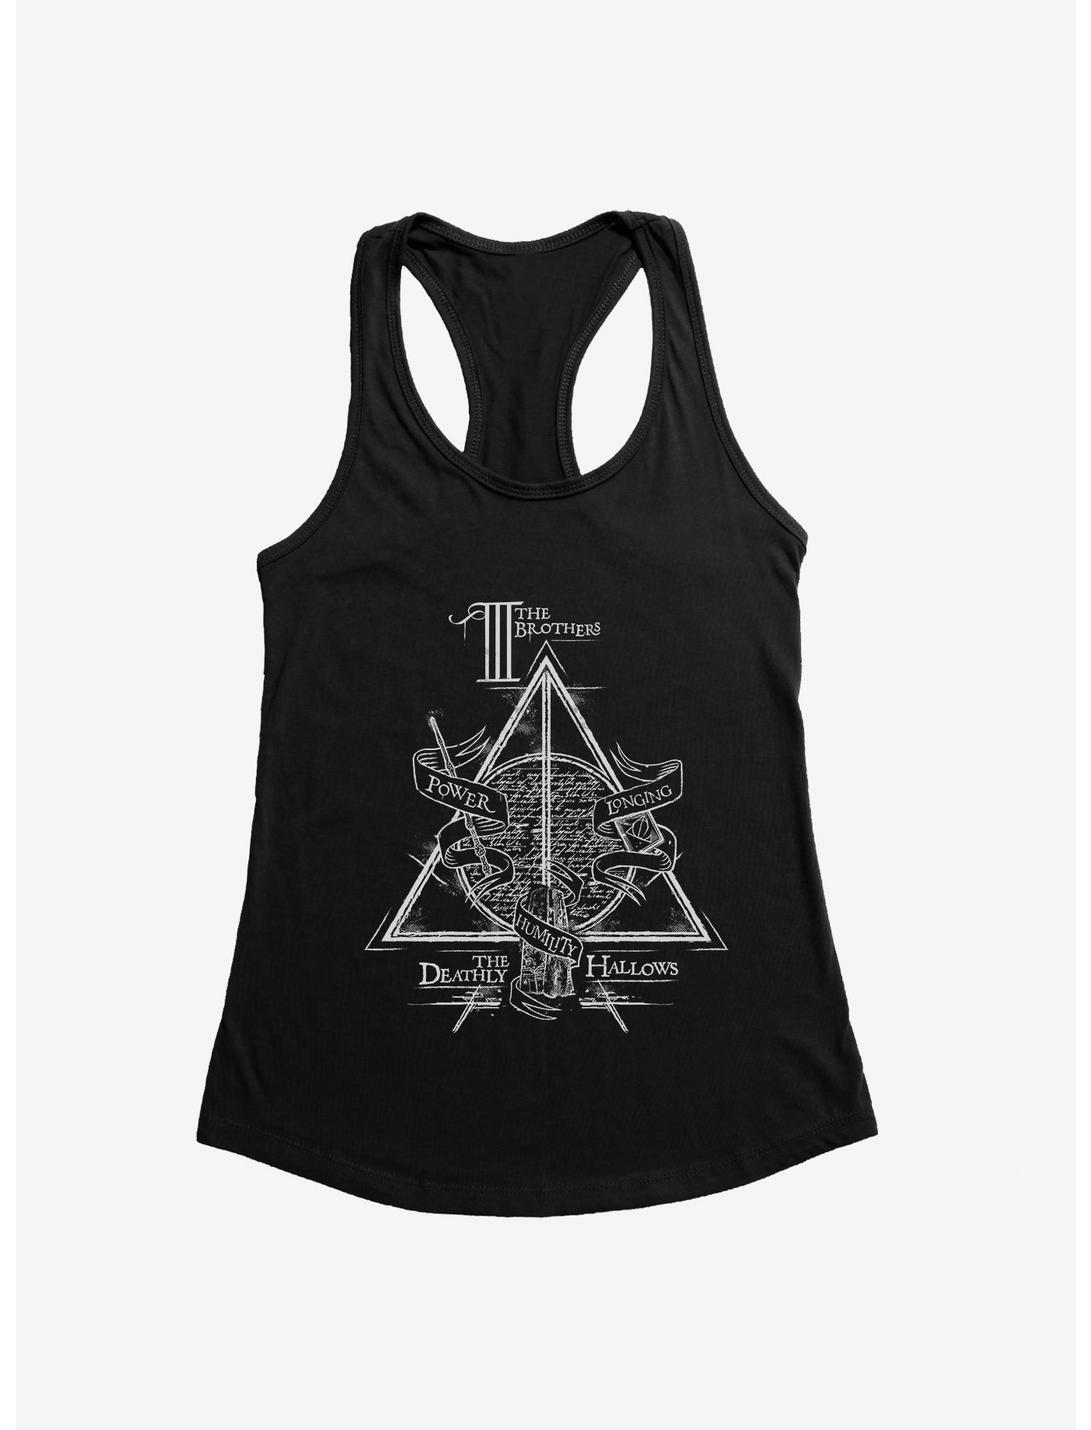 Harry Potter Deathly Hallows Three Brothers Girls Tank, BLACK, hi-res